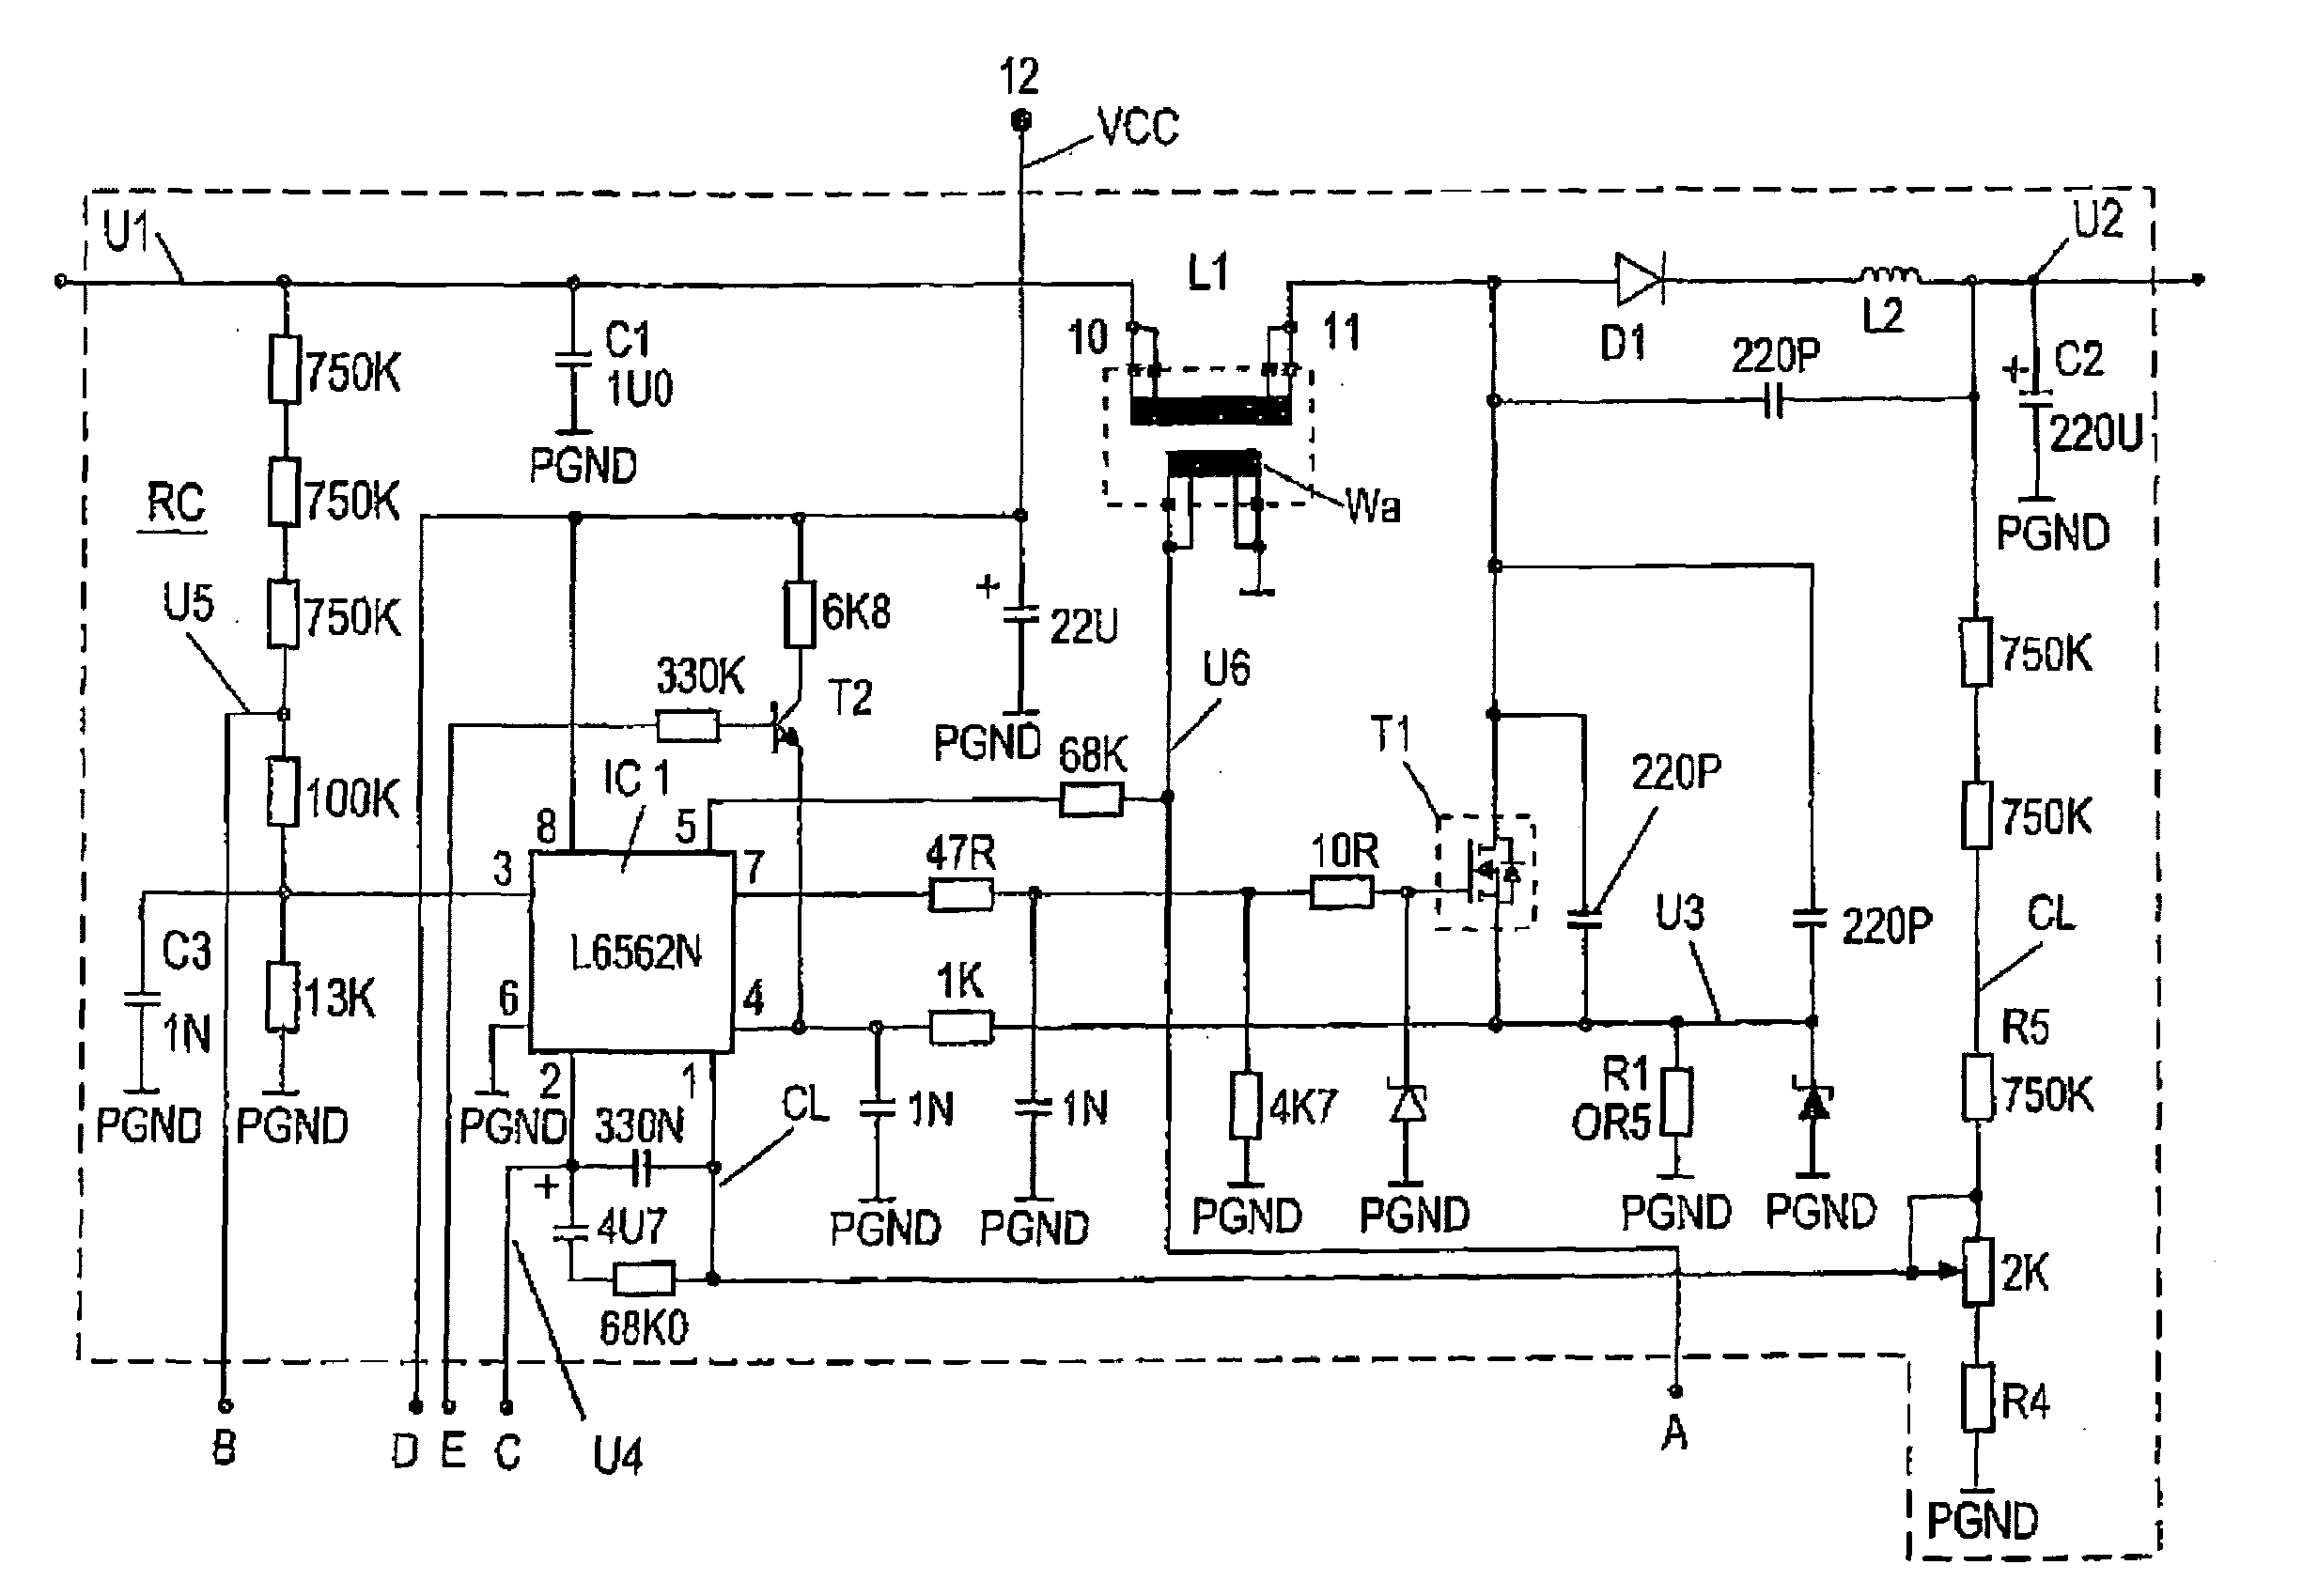 Over-voltage protection circuit for a switched mode power supply